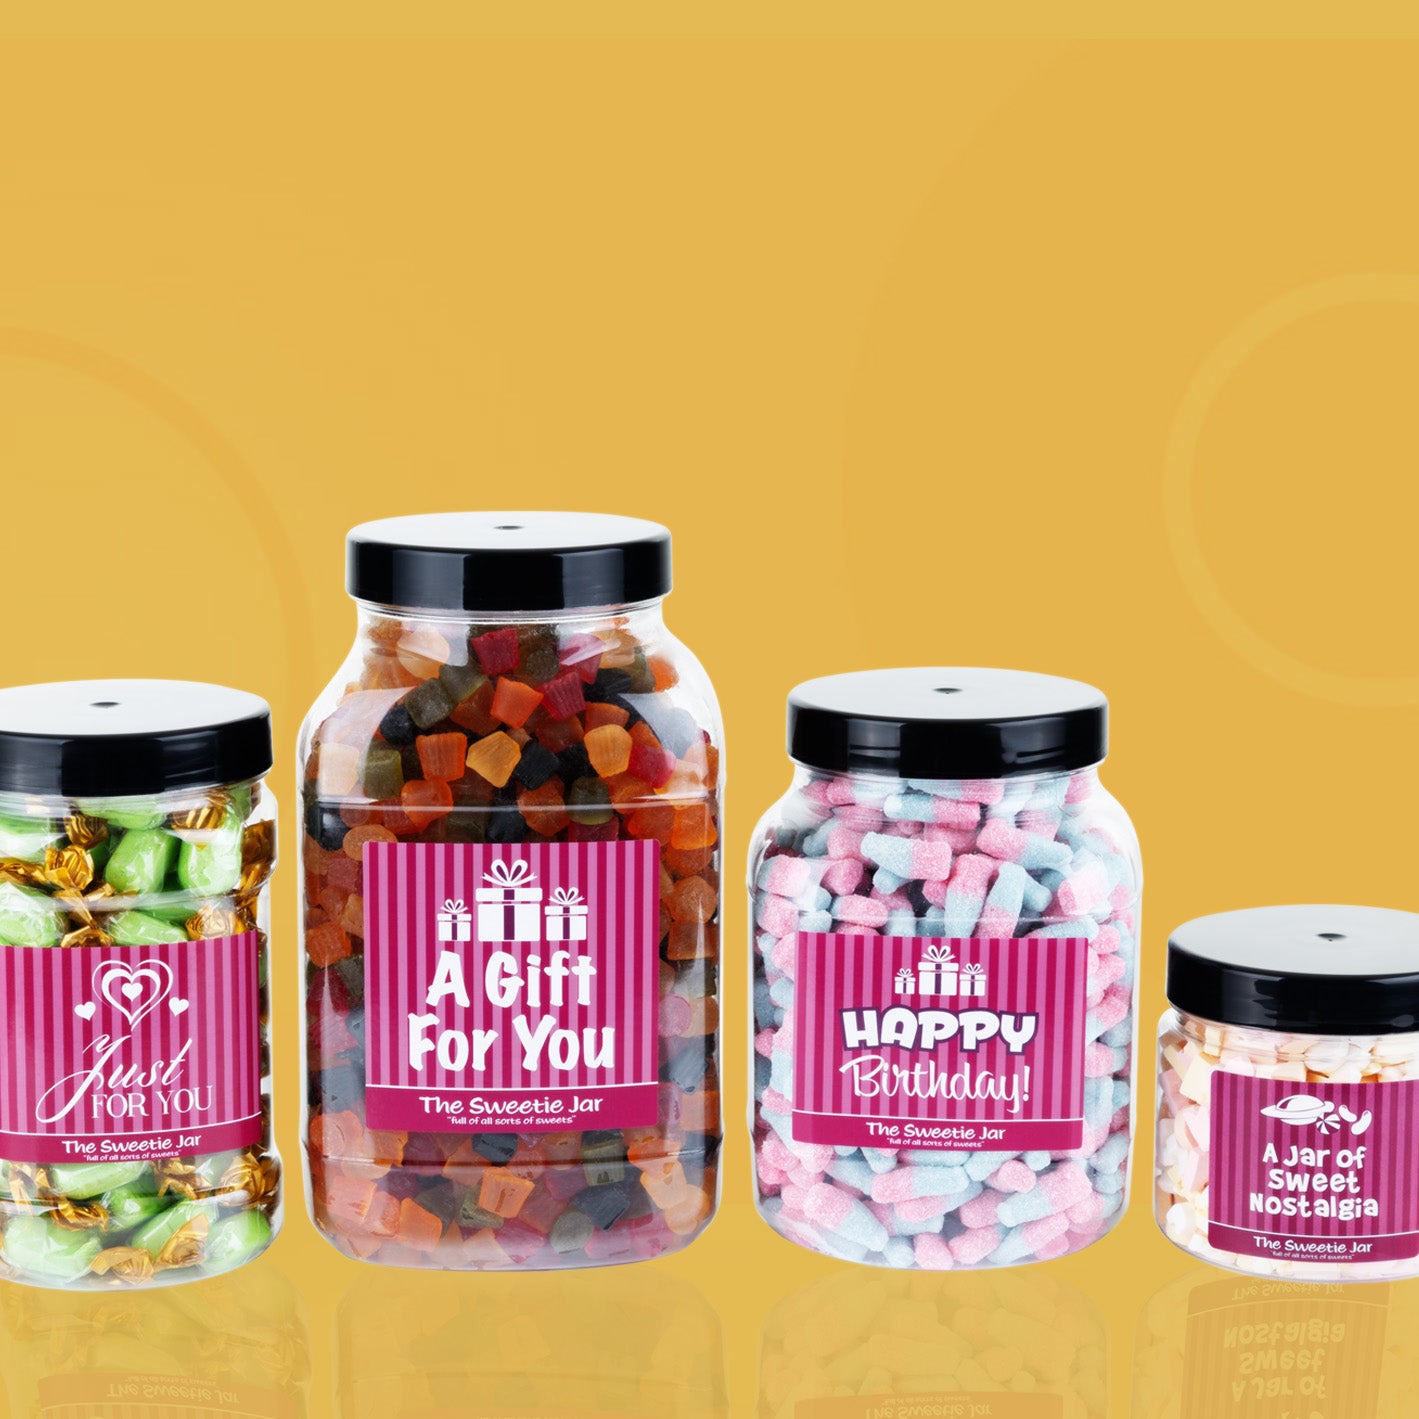 Check out our huge range of Jars of Retro Sweets, in 4 sizes.